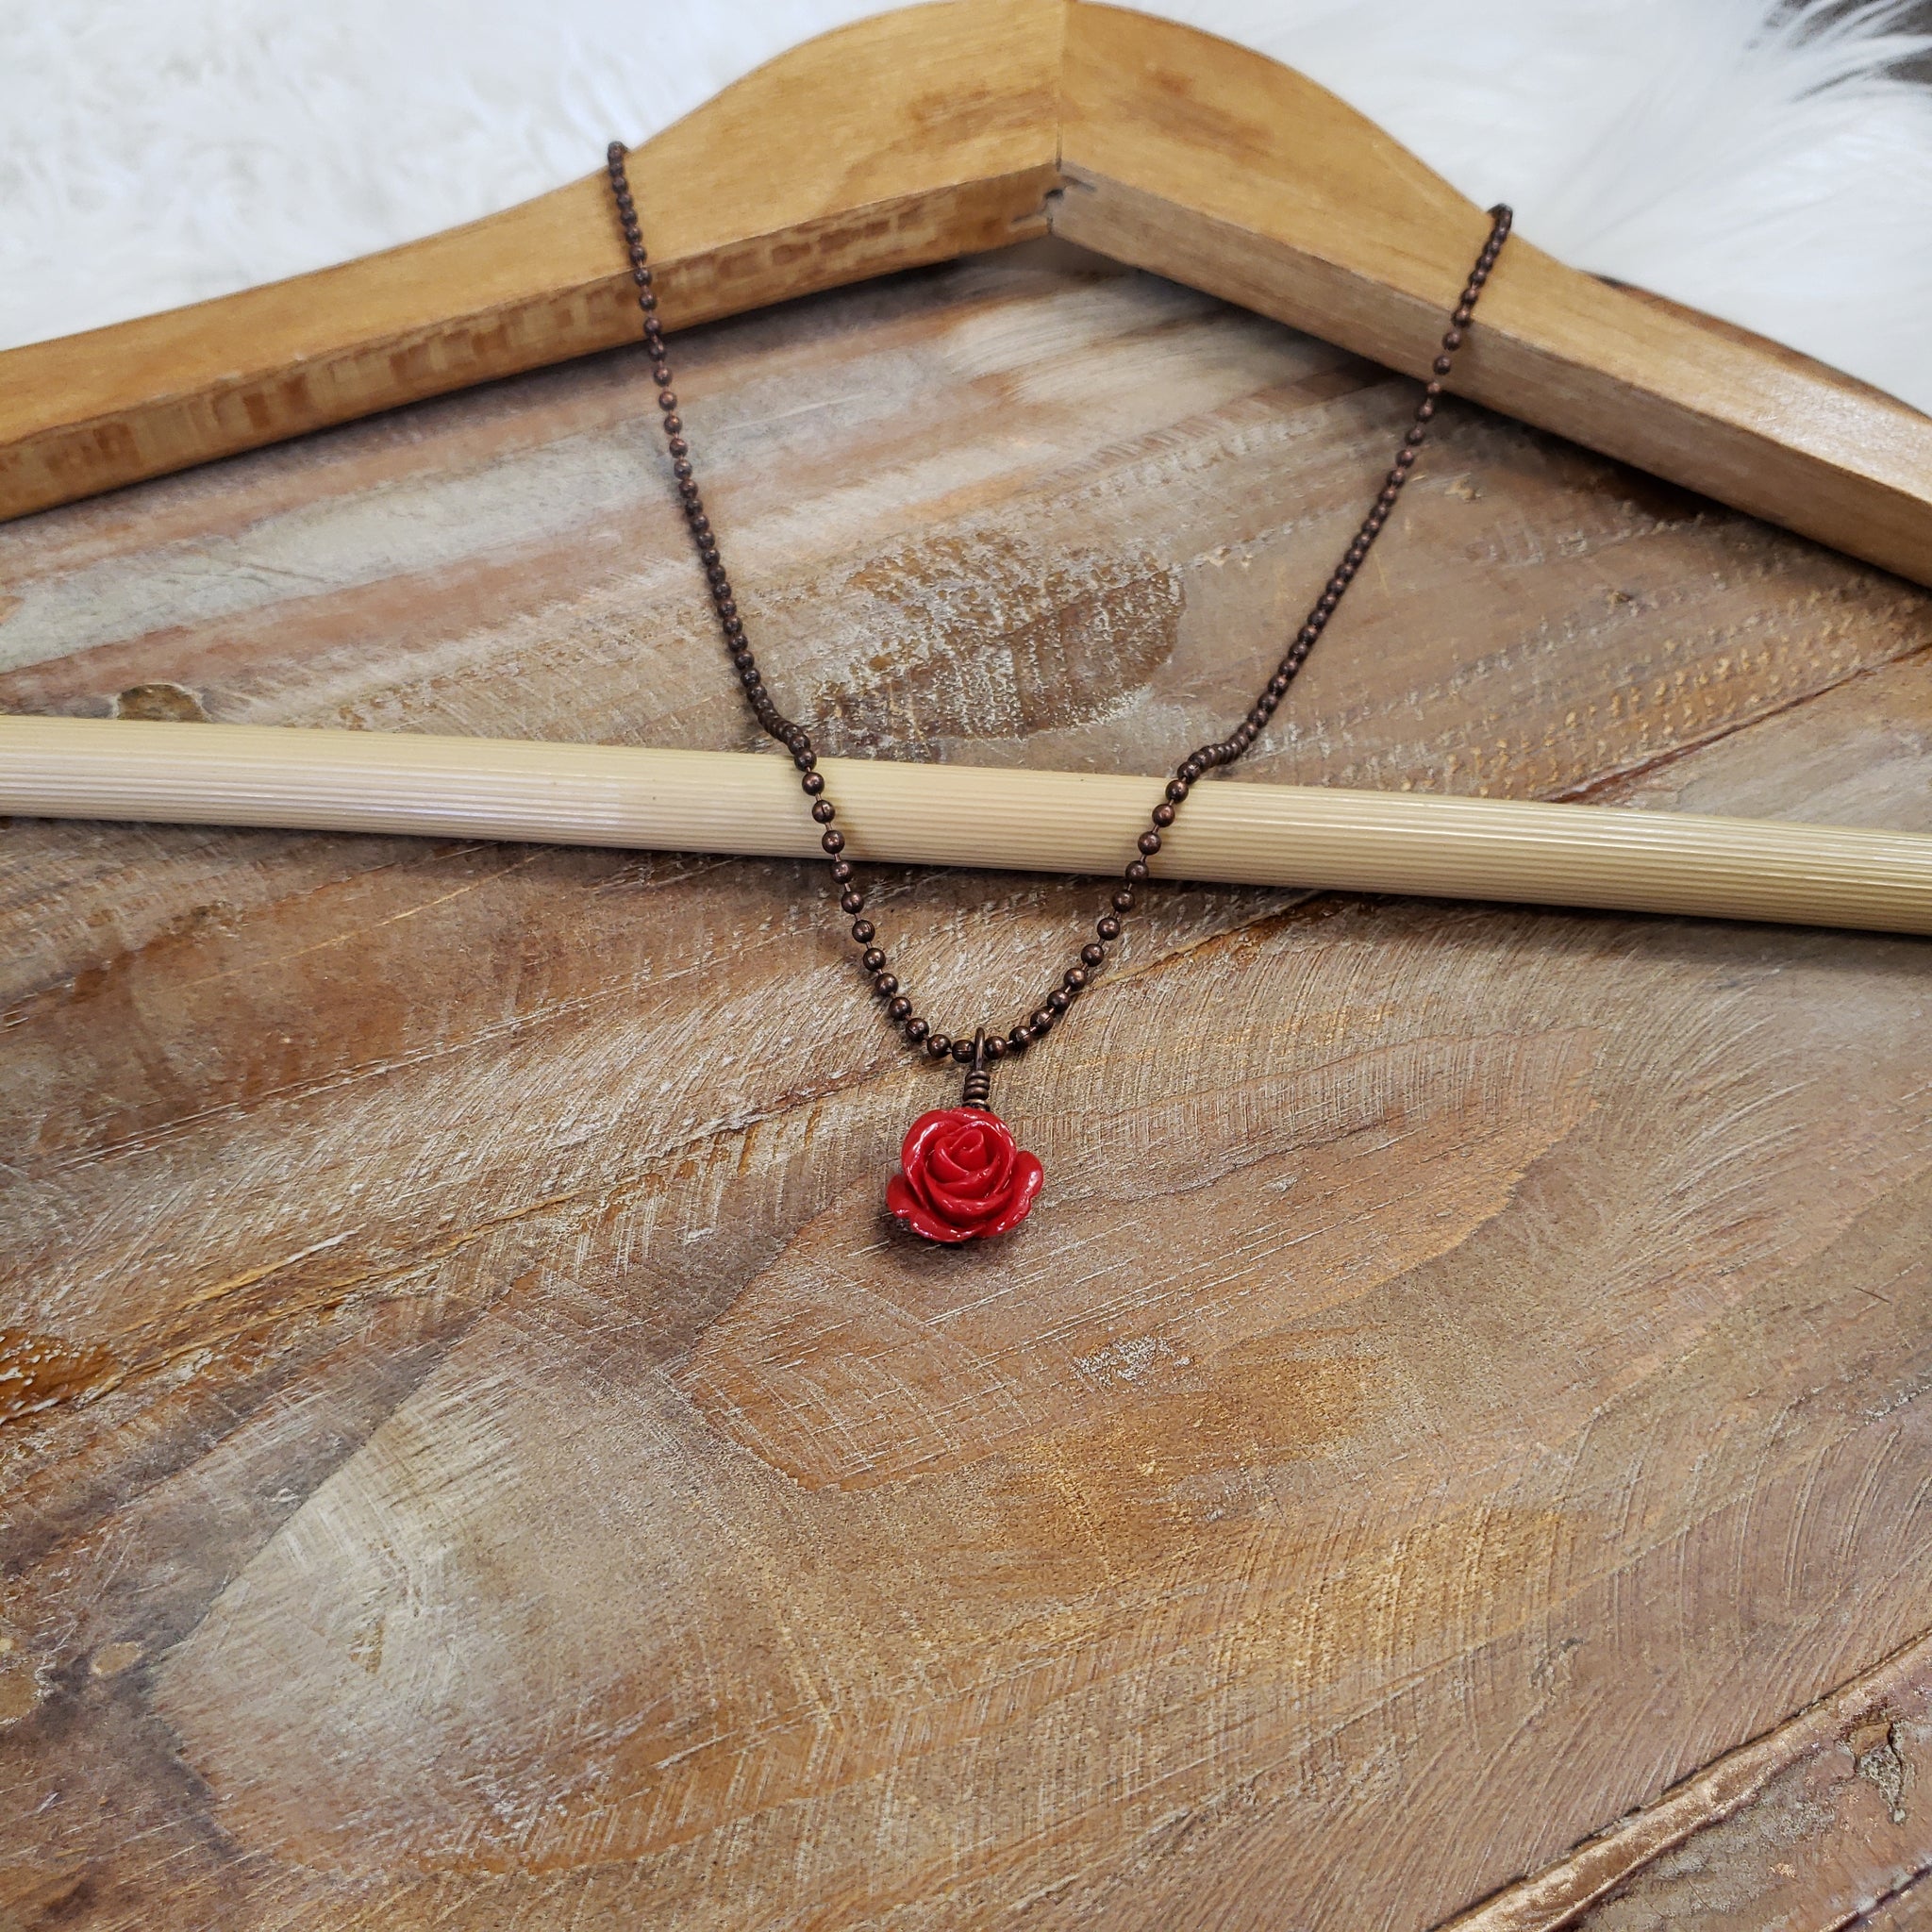 The Red Rose Necklace